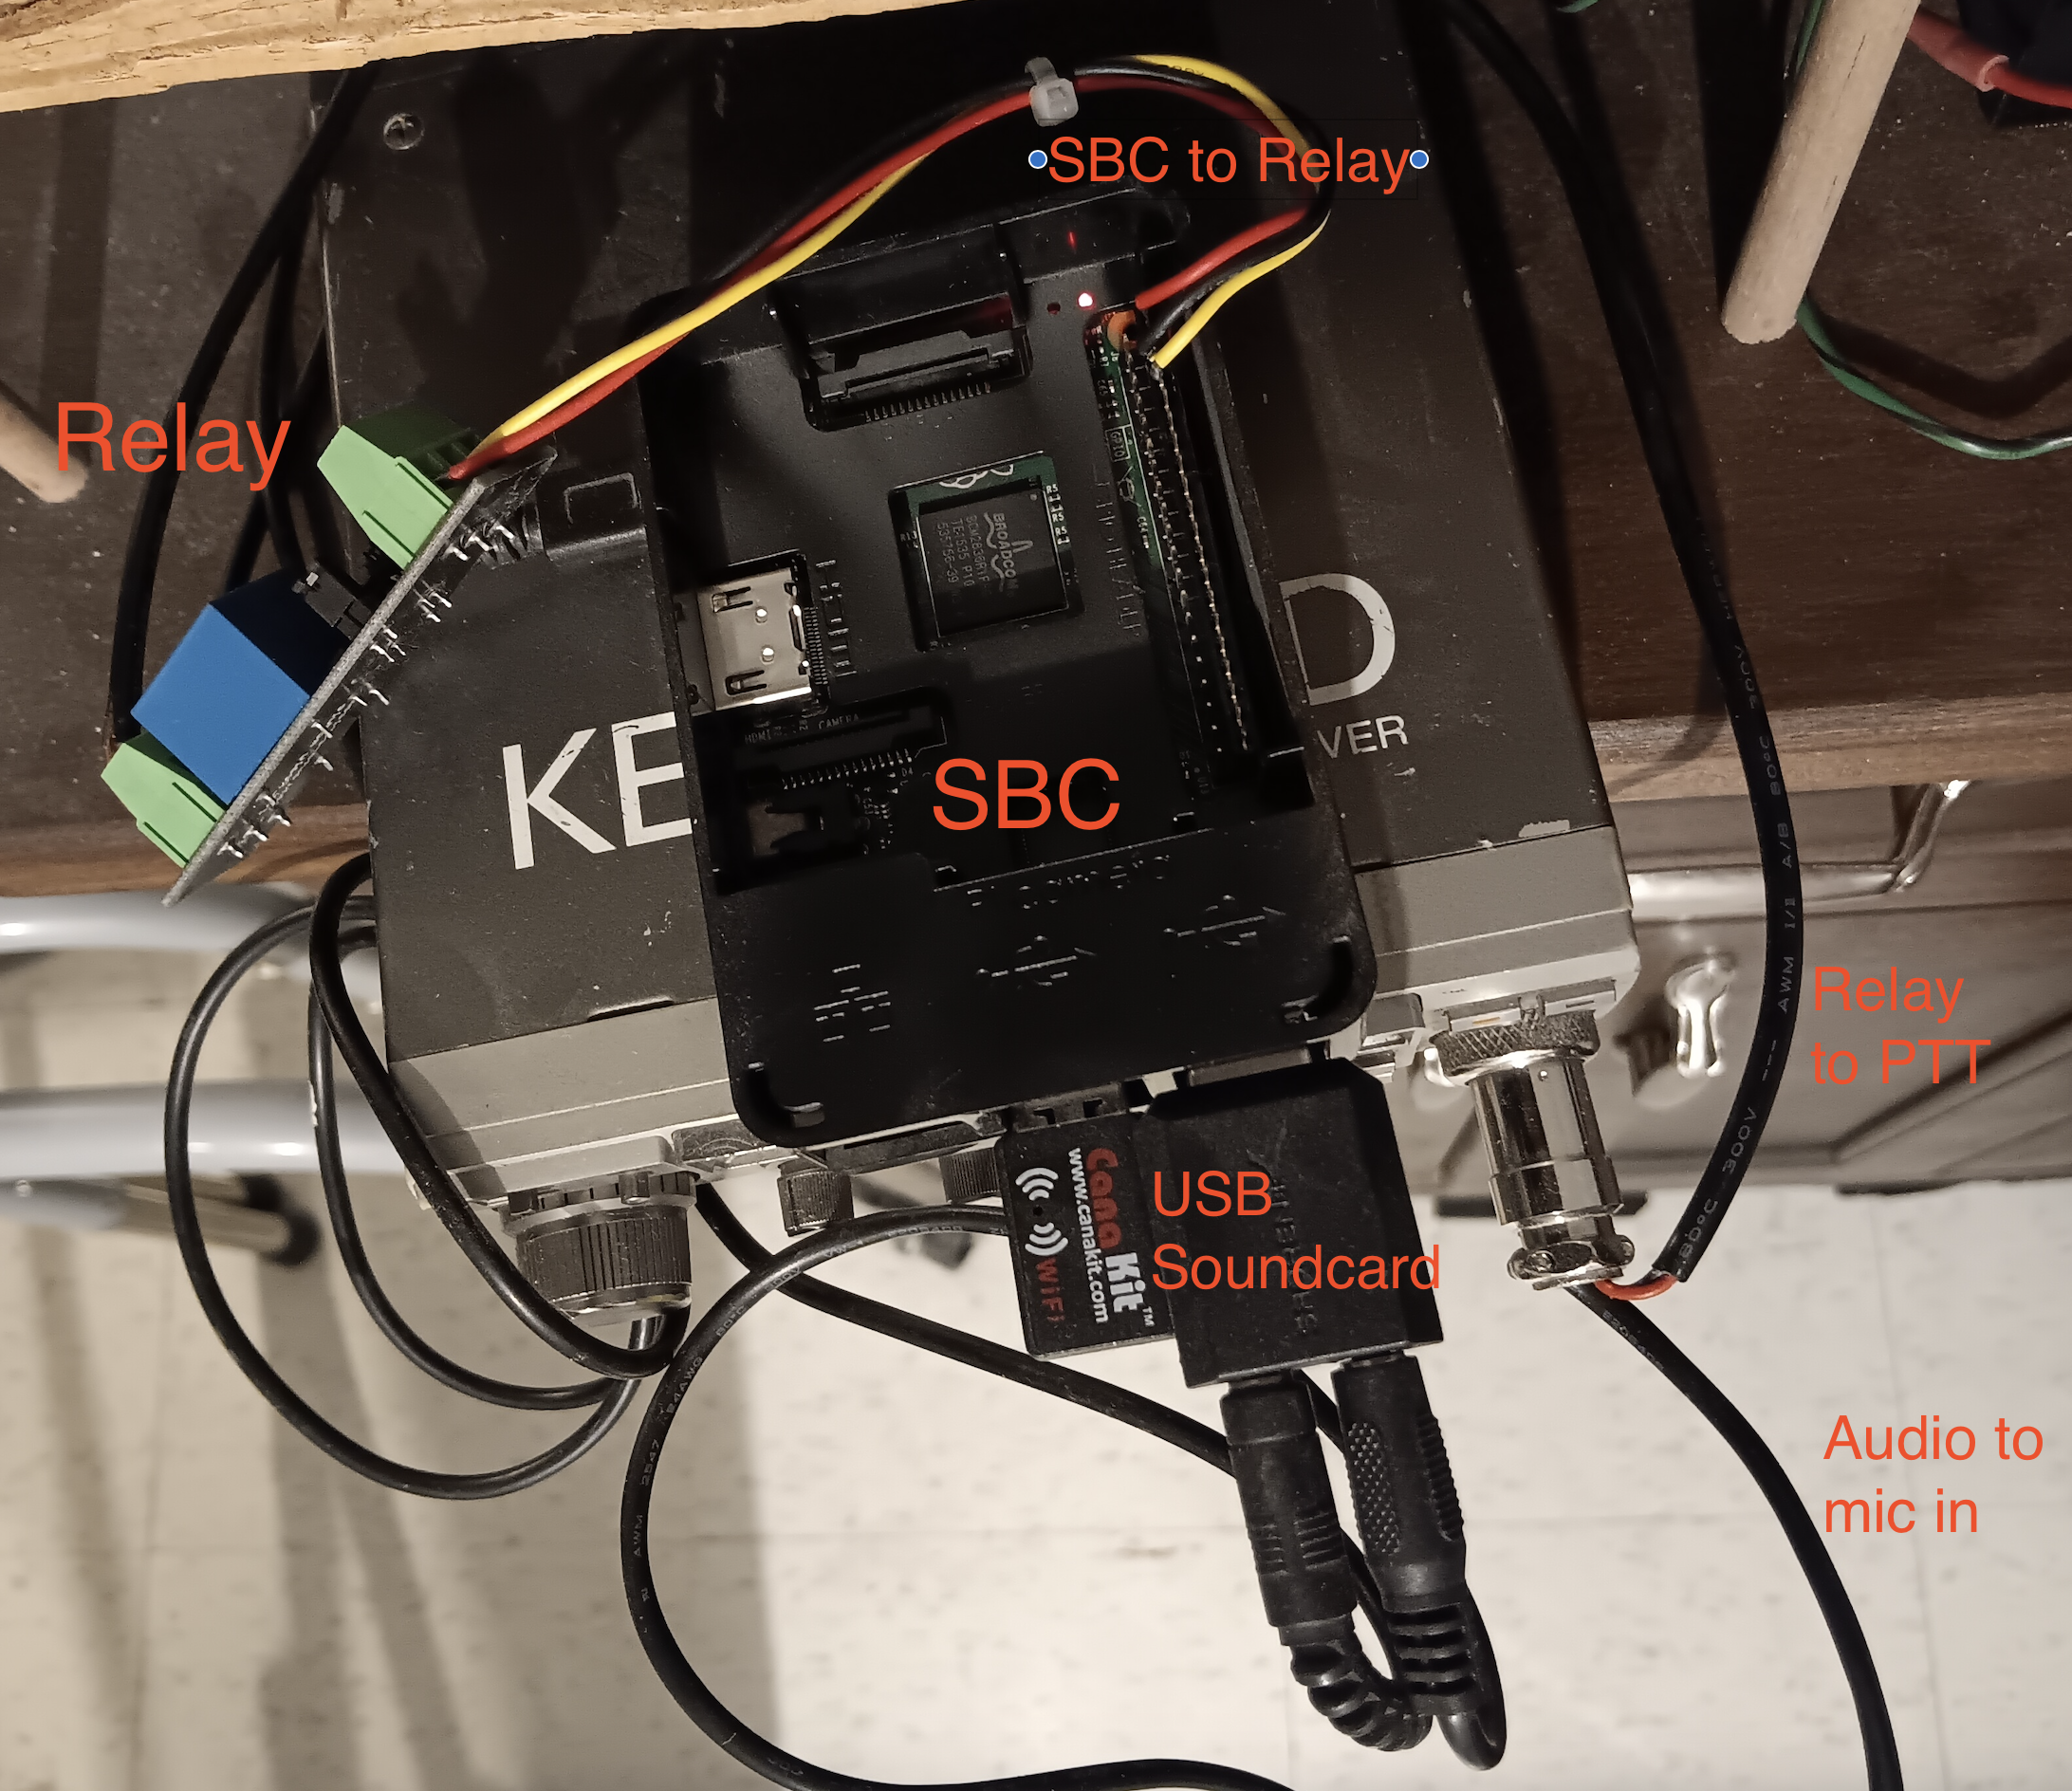 Photo of the whole SBC-Relay-Transceiver setup. There is an SBC, a USB soundcard, a relay module, a TM-201A transceiver, and wires among all of these things